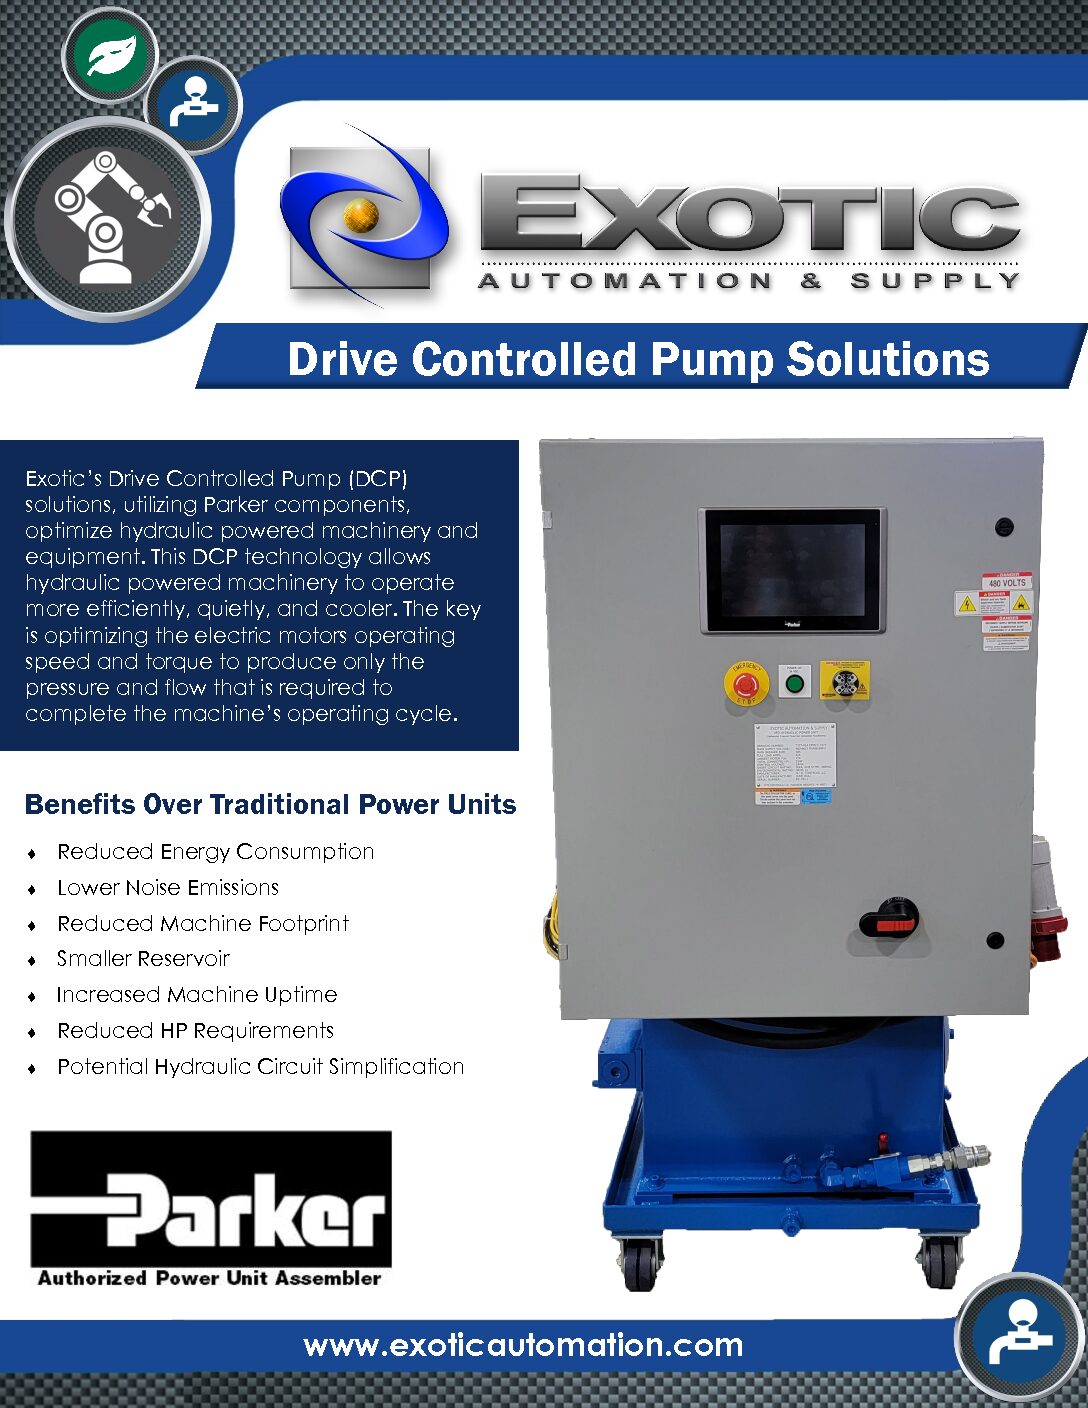 Exotic Drive Controlled Pump Solutions